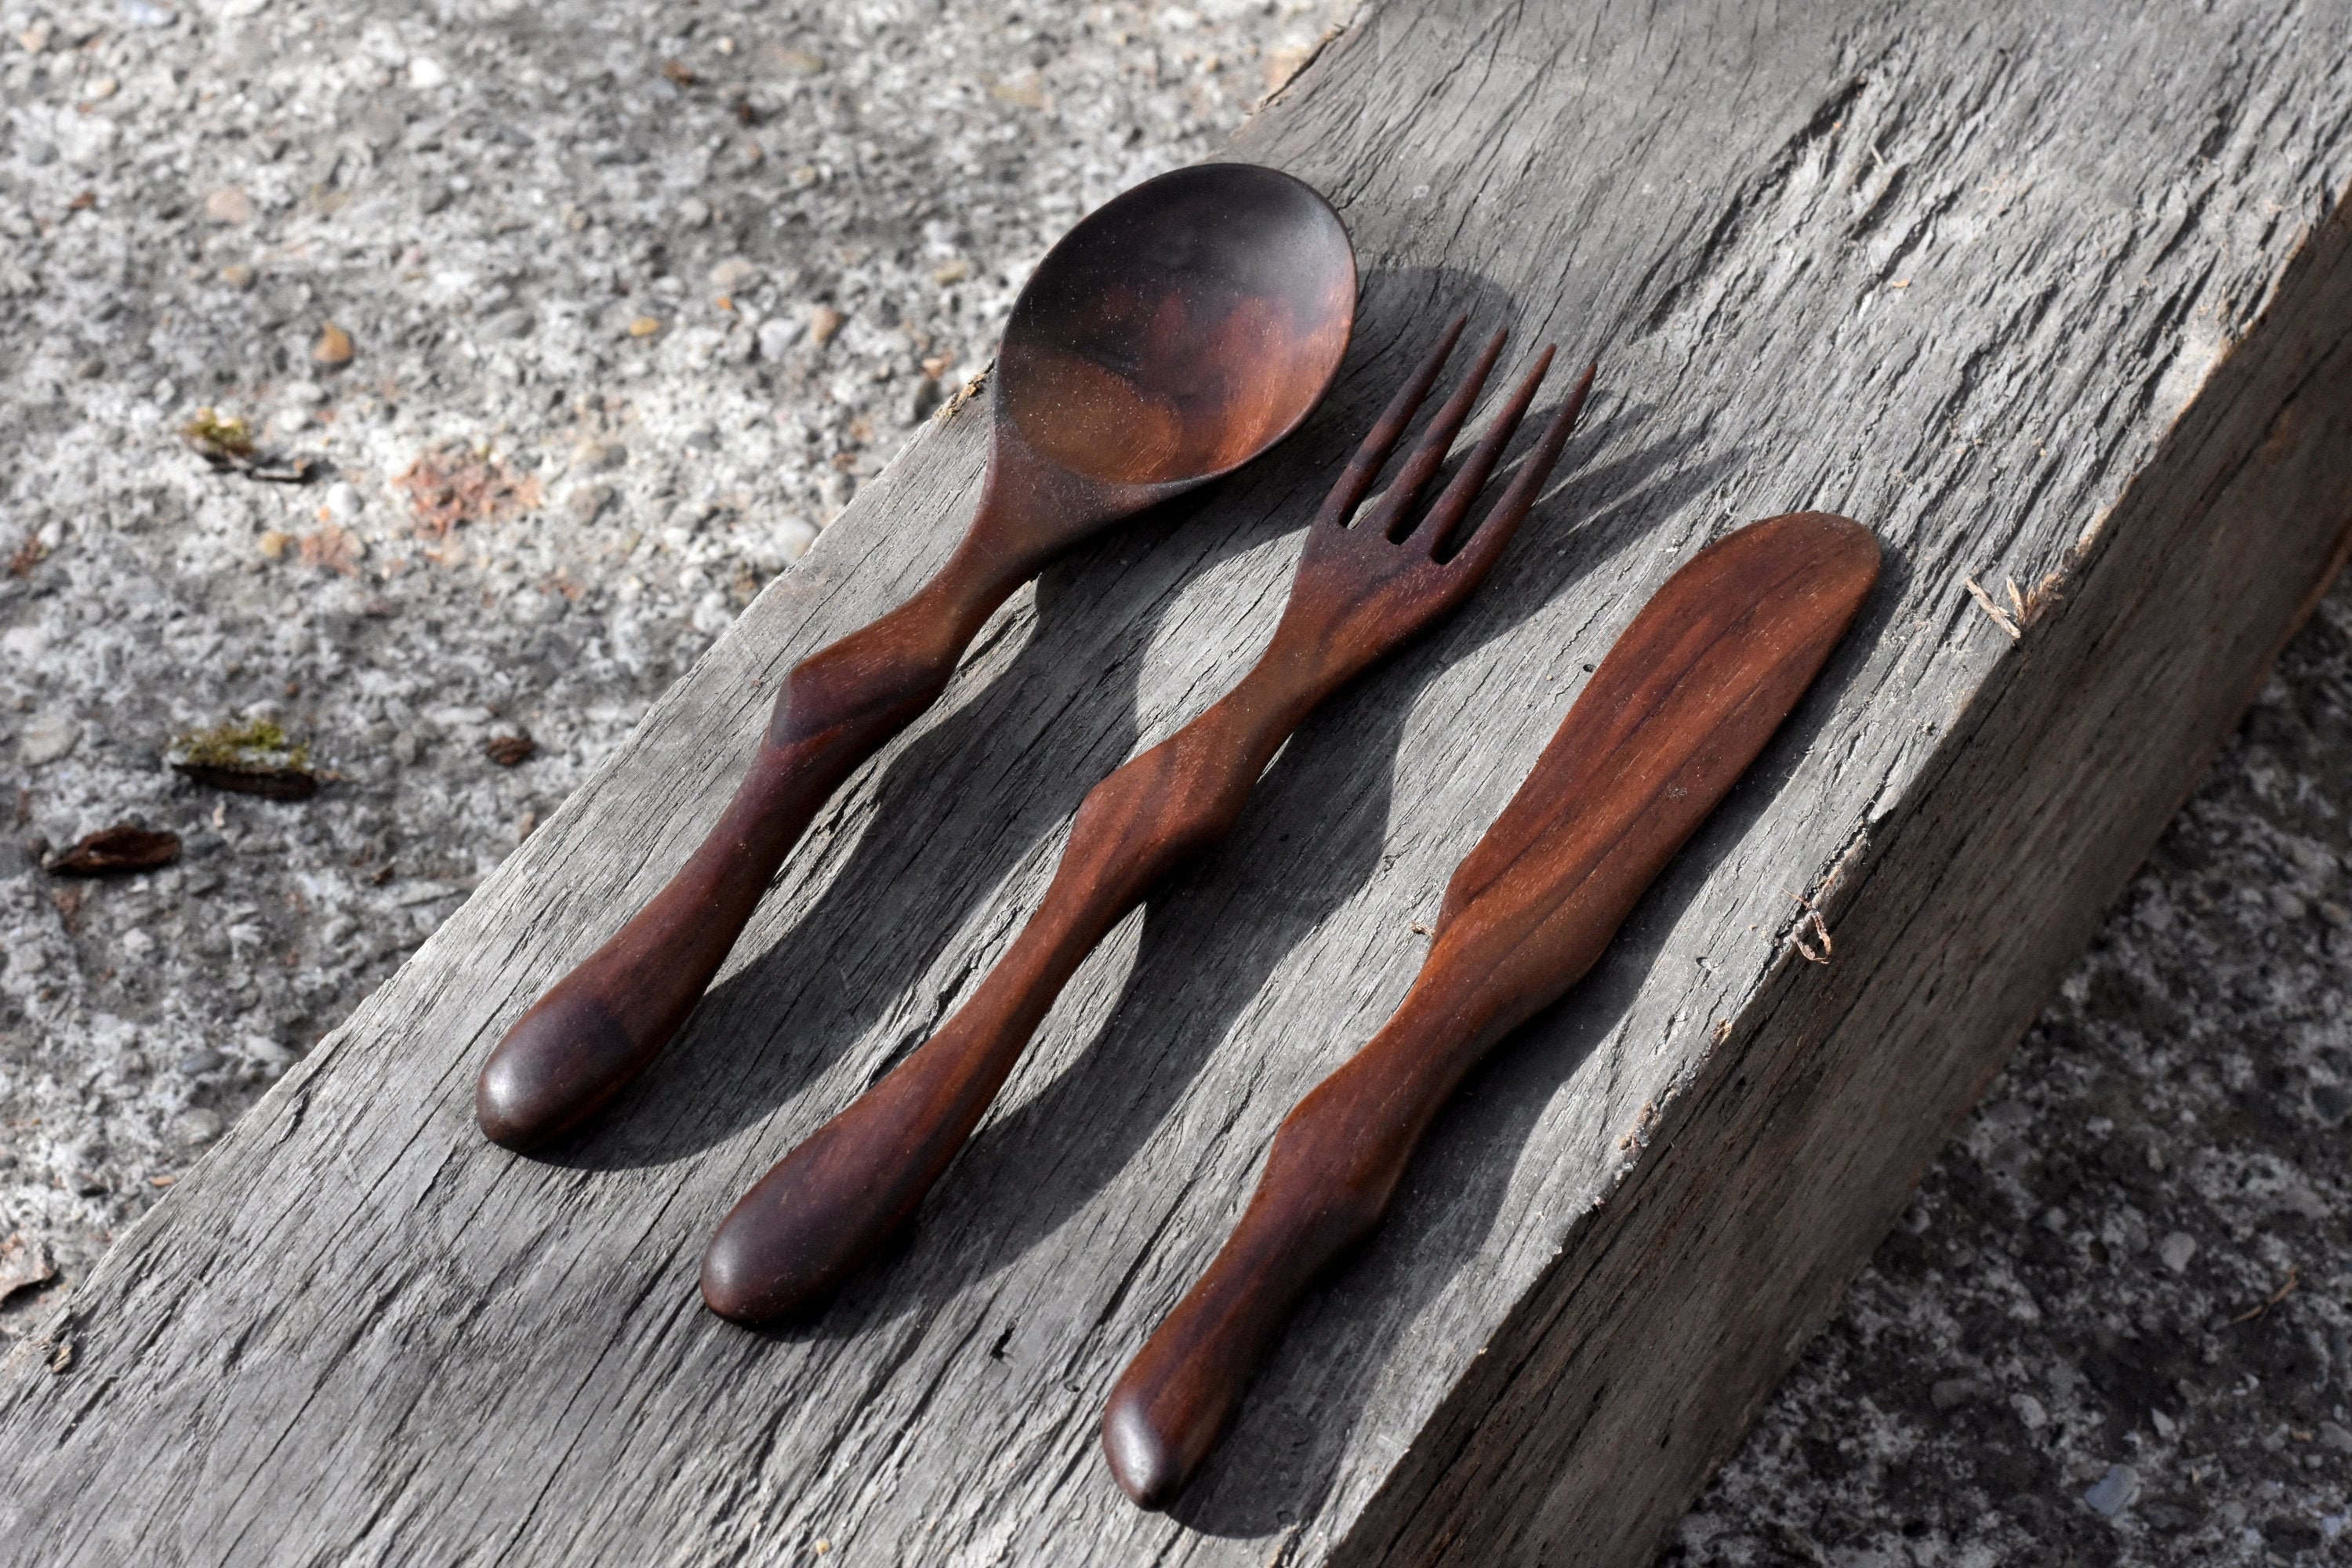 Busnos Wooden Utensils for Eating with Updated Case Reusable